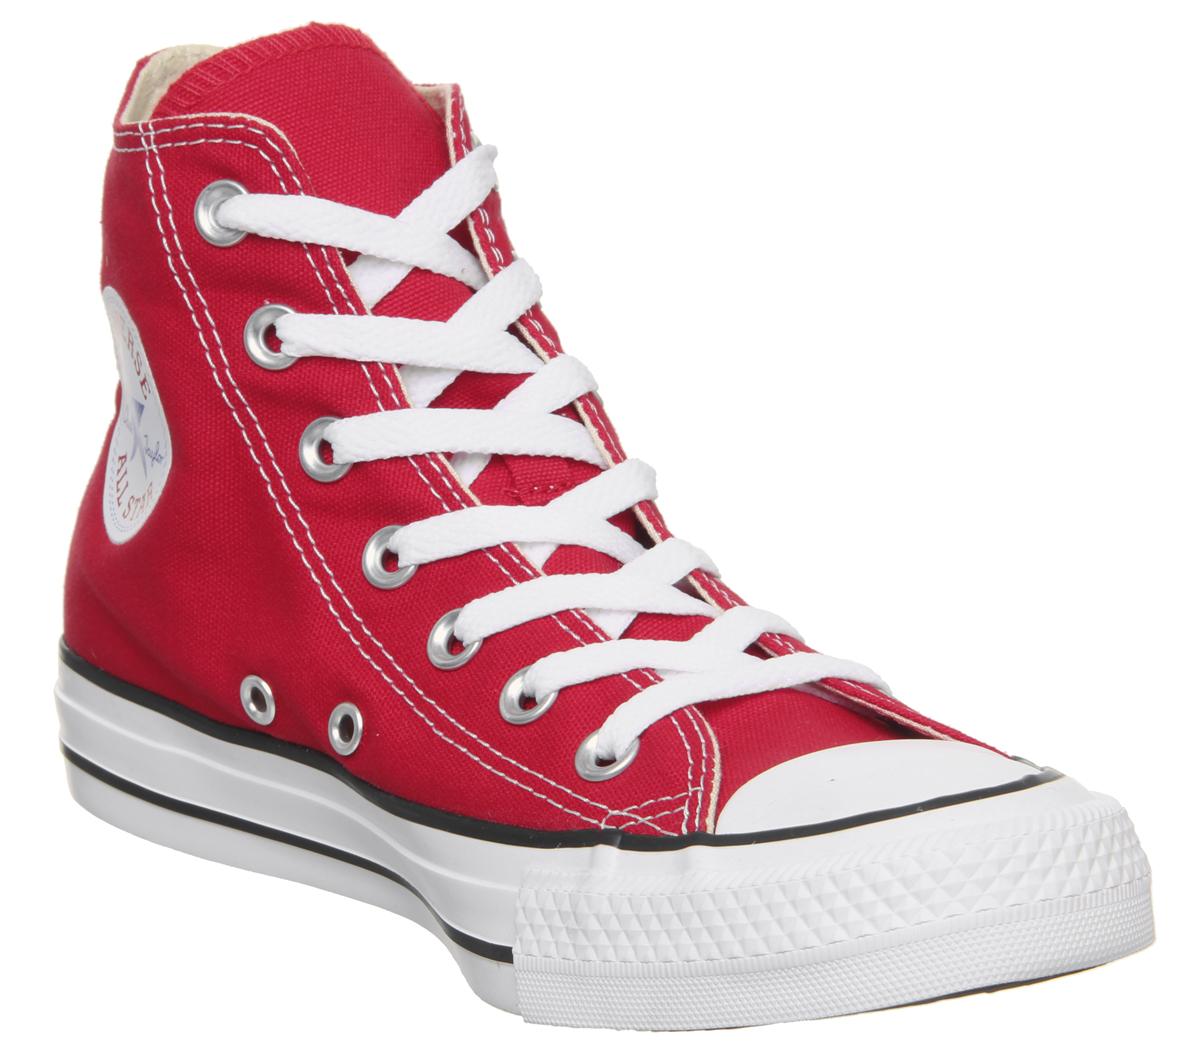 red converse womens size 8